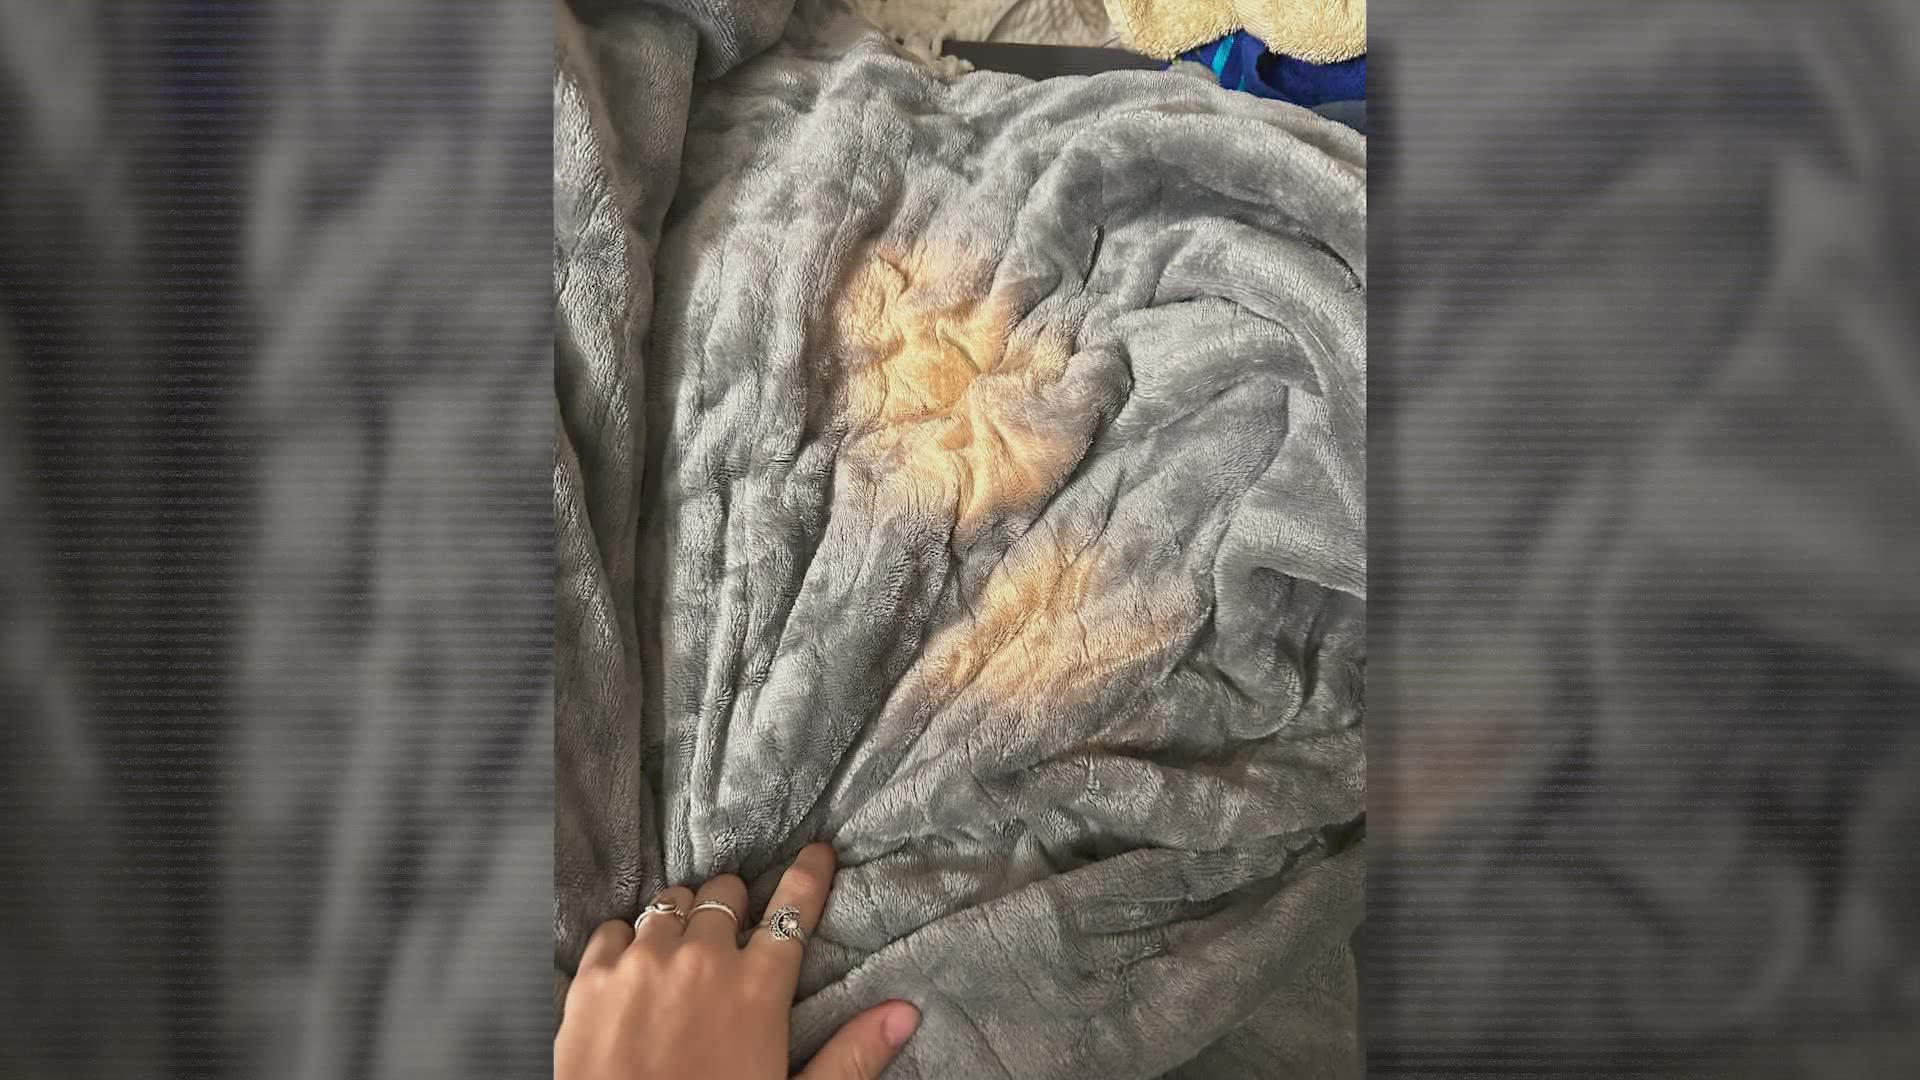 Paige Bourquin says her ‘CURECURE’ electric blanket nearly caught fire. Reviews show others were also burned by their experience.